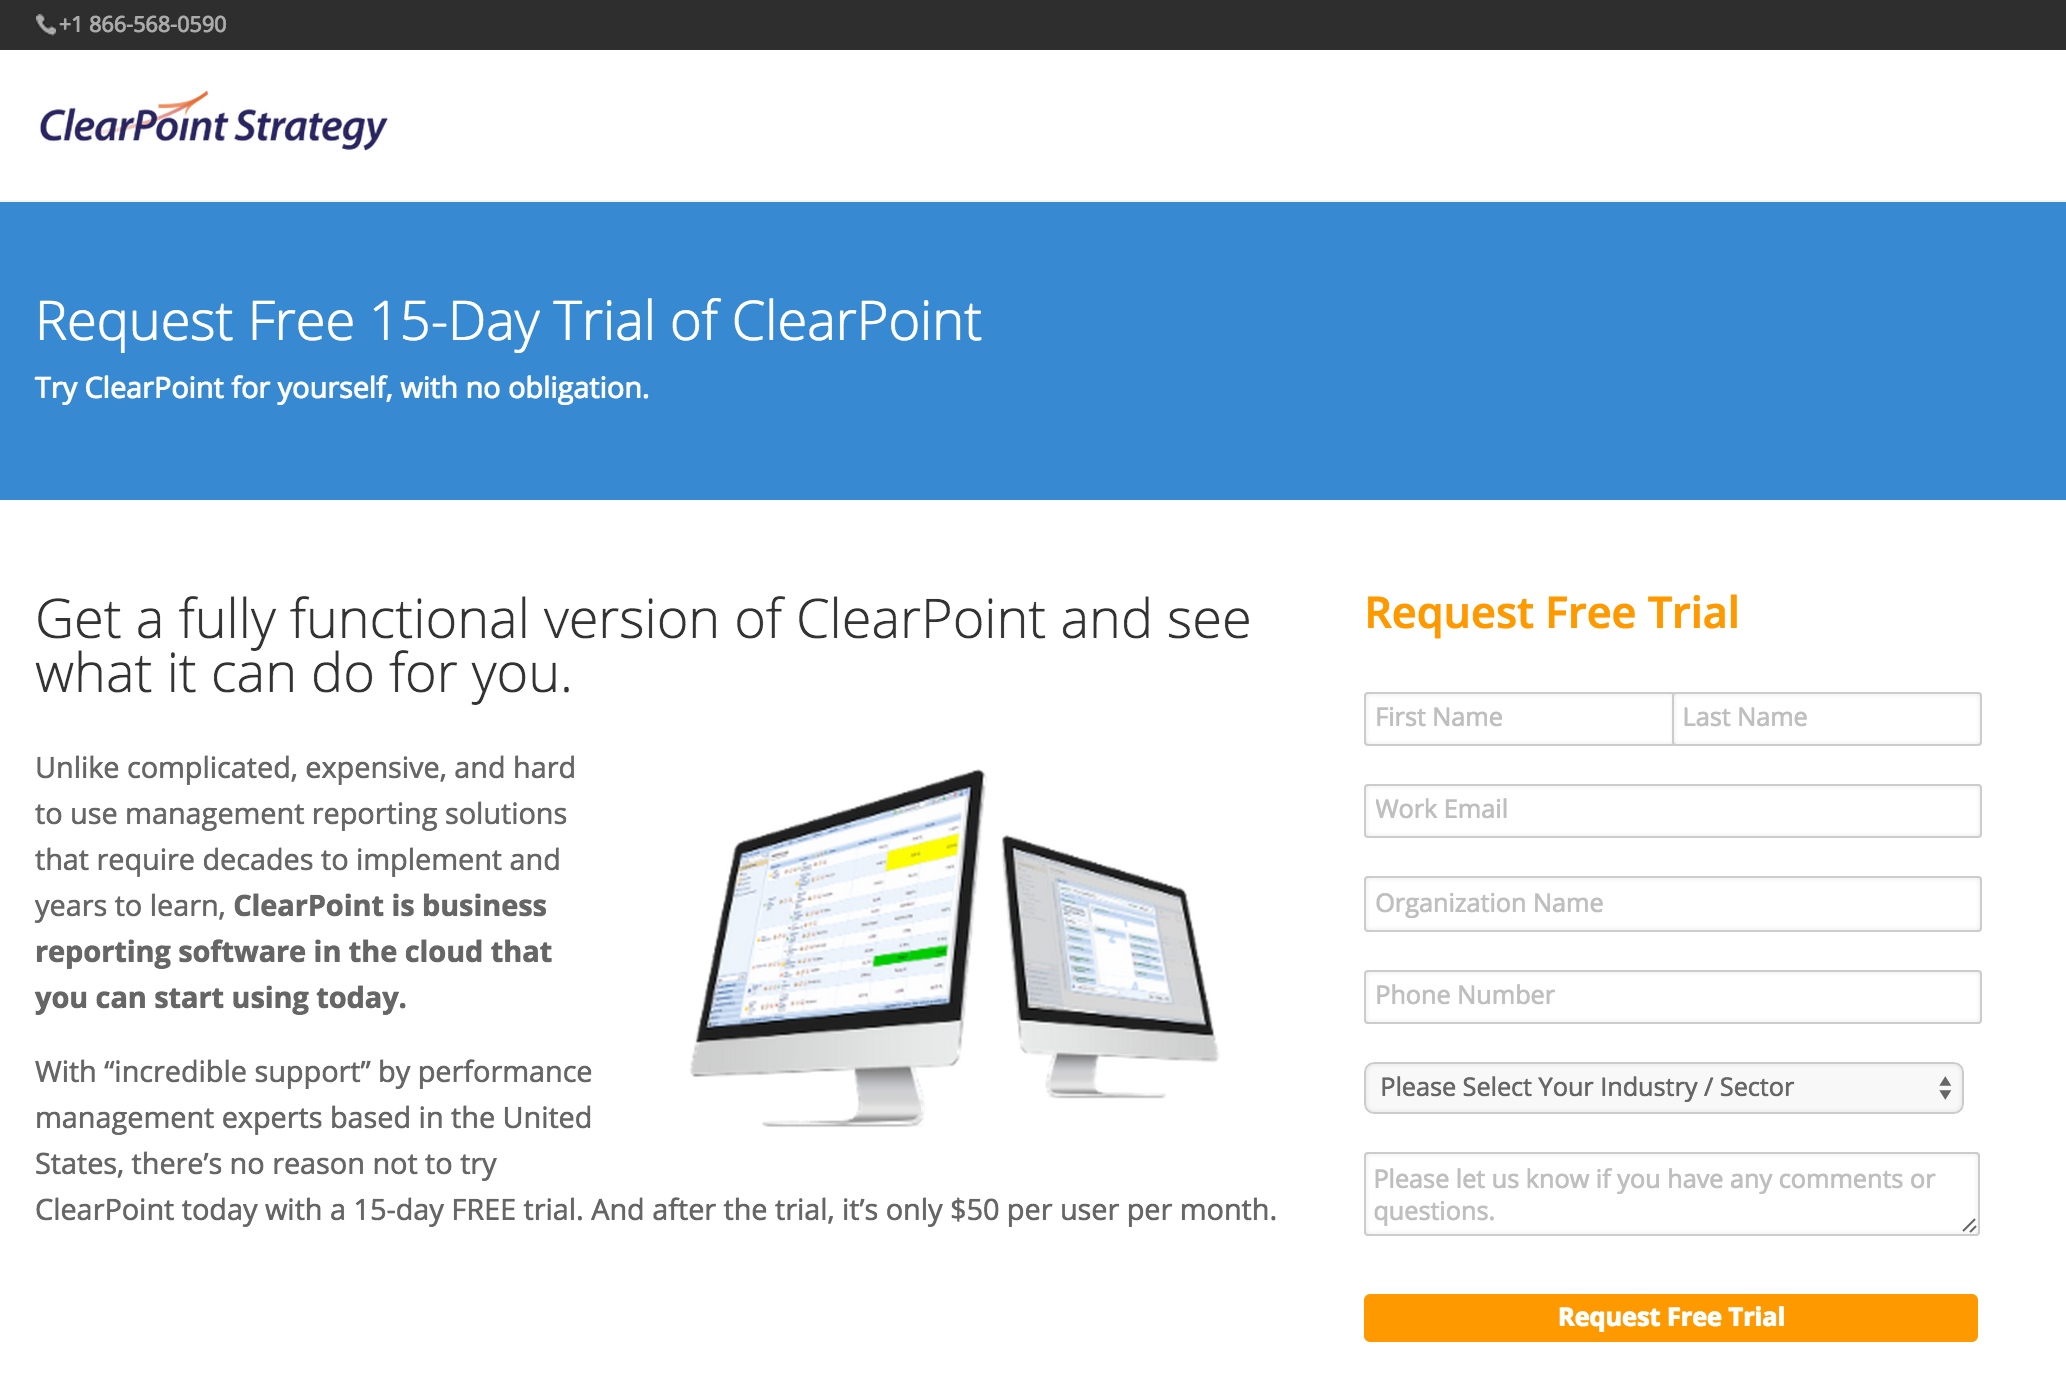 Request free trial form on landing page